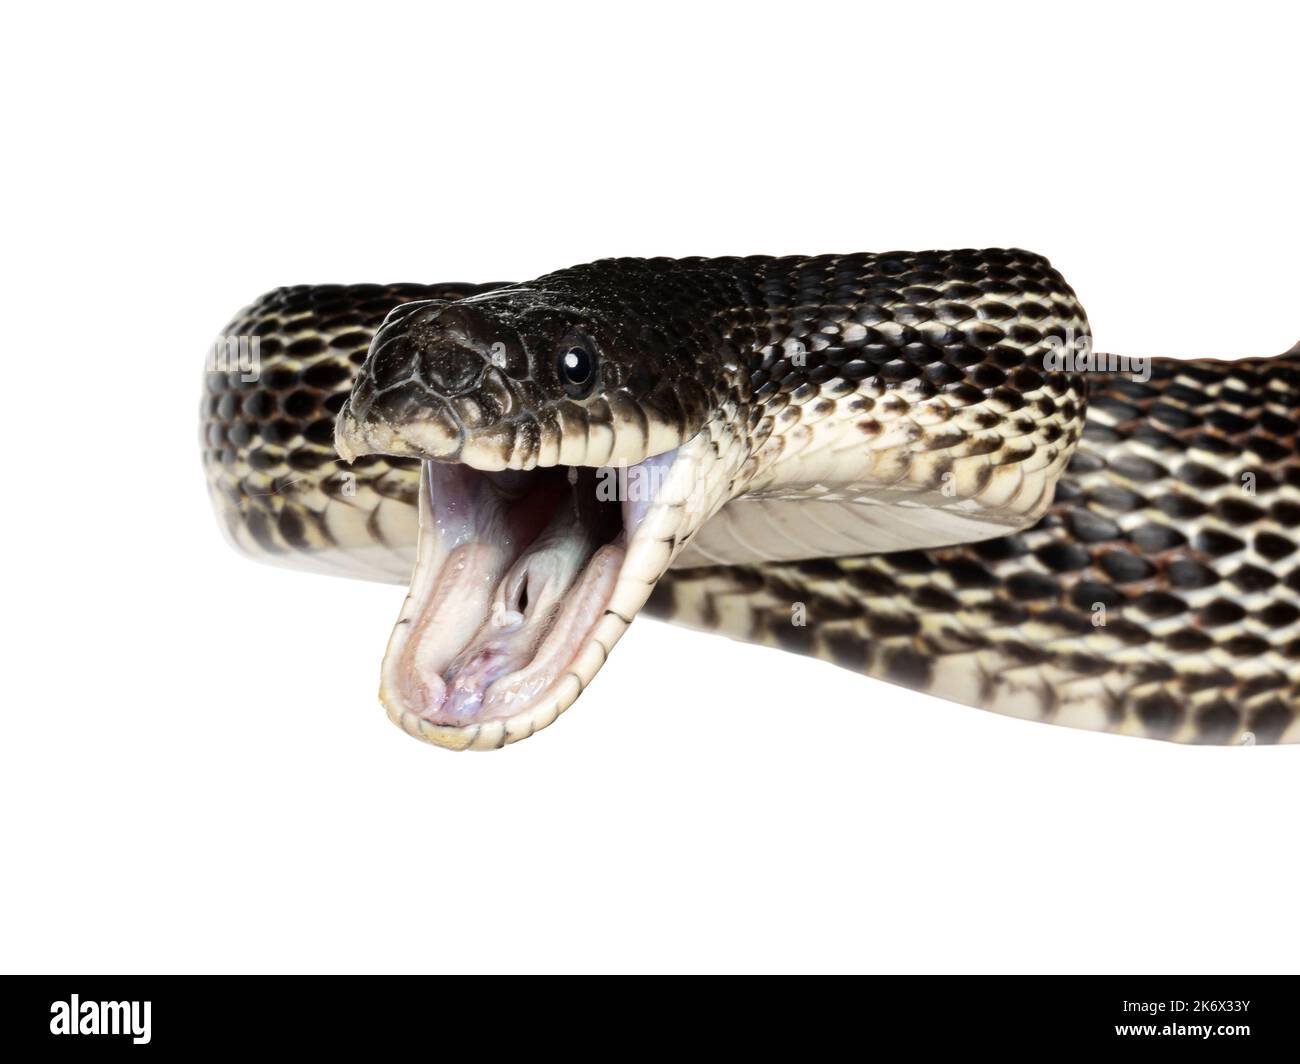 head shot of a Black rat snake aka Pantherophis obsoletus. Mouth wide open. Isolated on a white background. Stock Photo